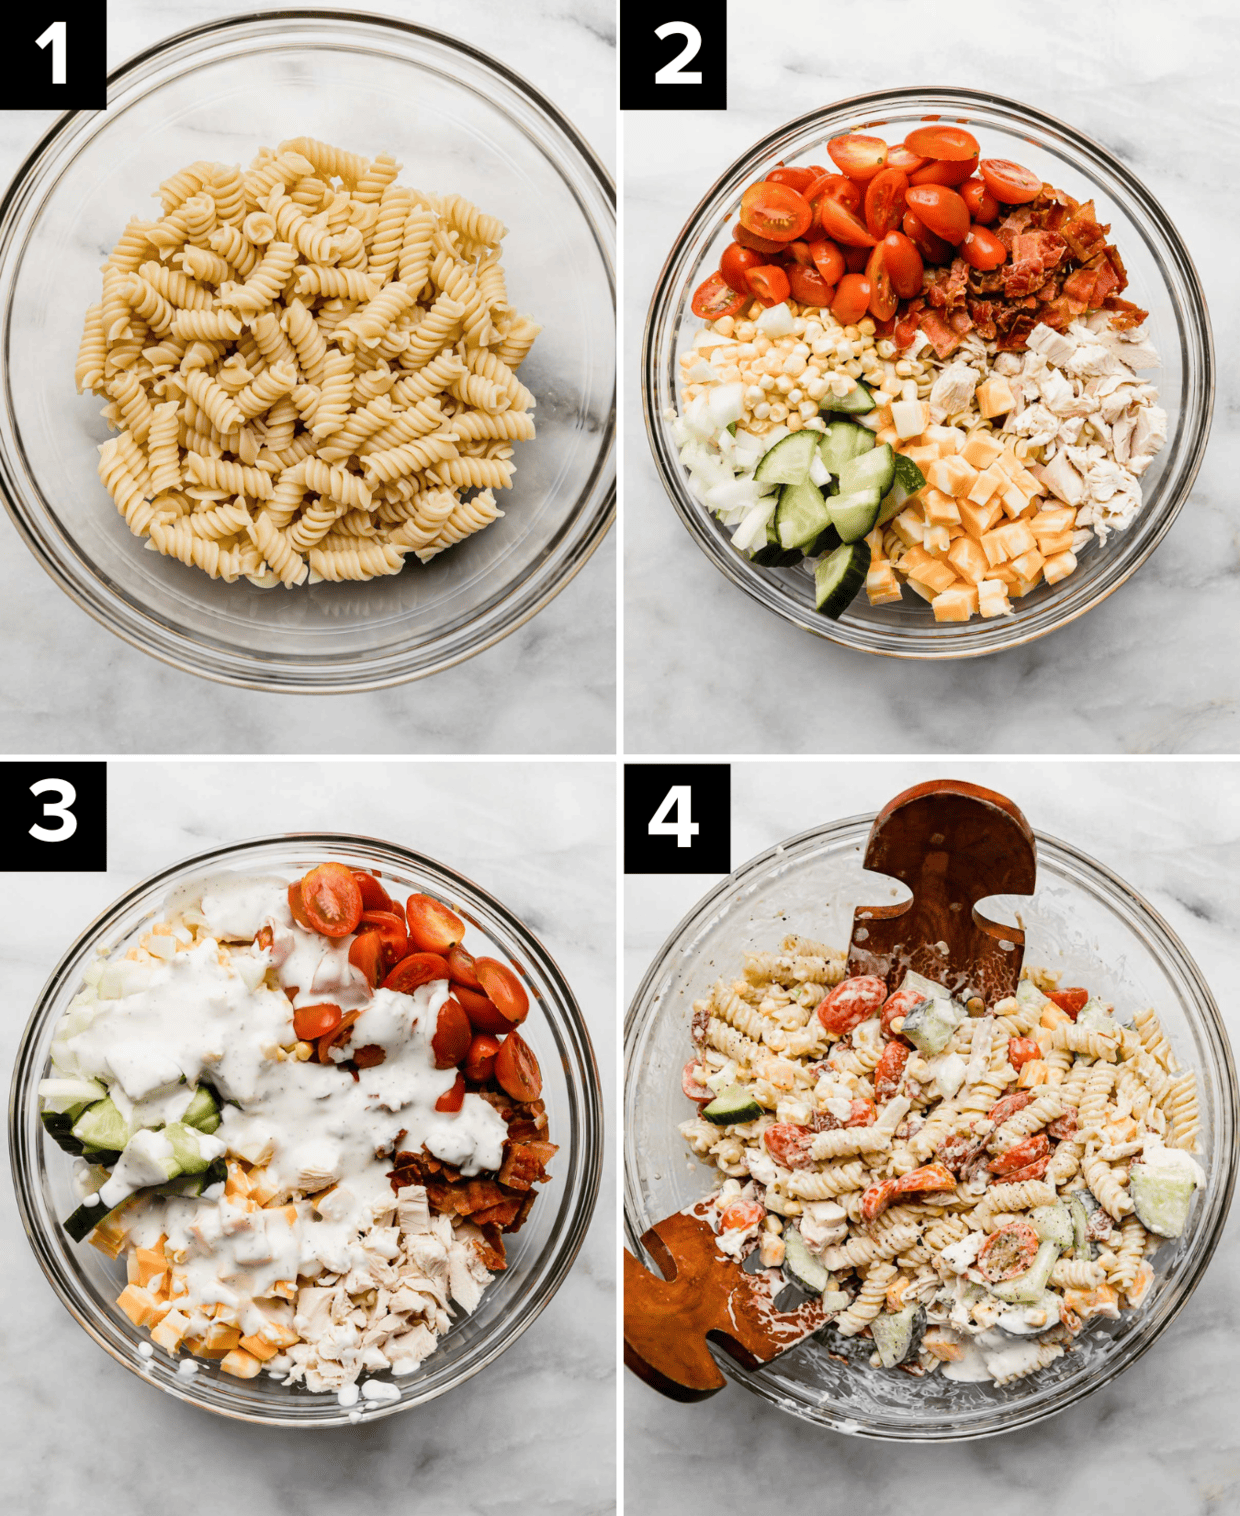 Four photos, top left is glass bowl with cooked rotini pasta in it, top right image is chicken, tomatoes, cucumber, cubed cheese, and bacon in a glass bowl, Chicken Bacon Ranch Pasta Salad in a glass bowl in both bottom photos.